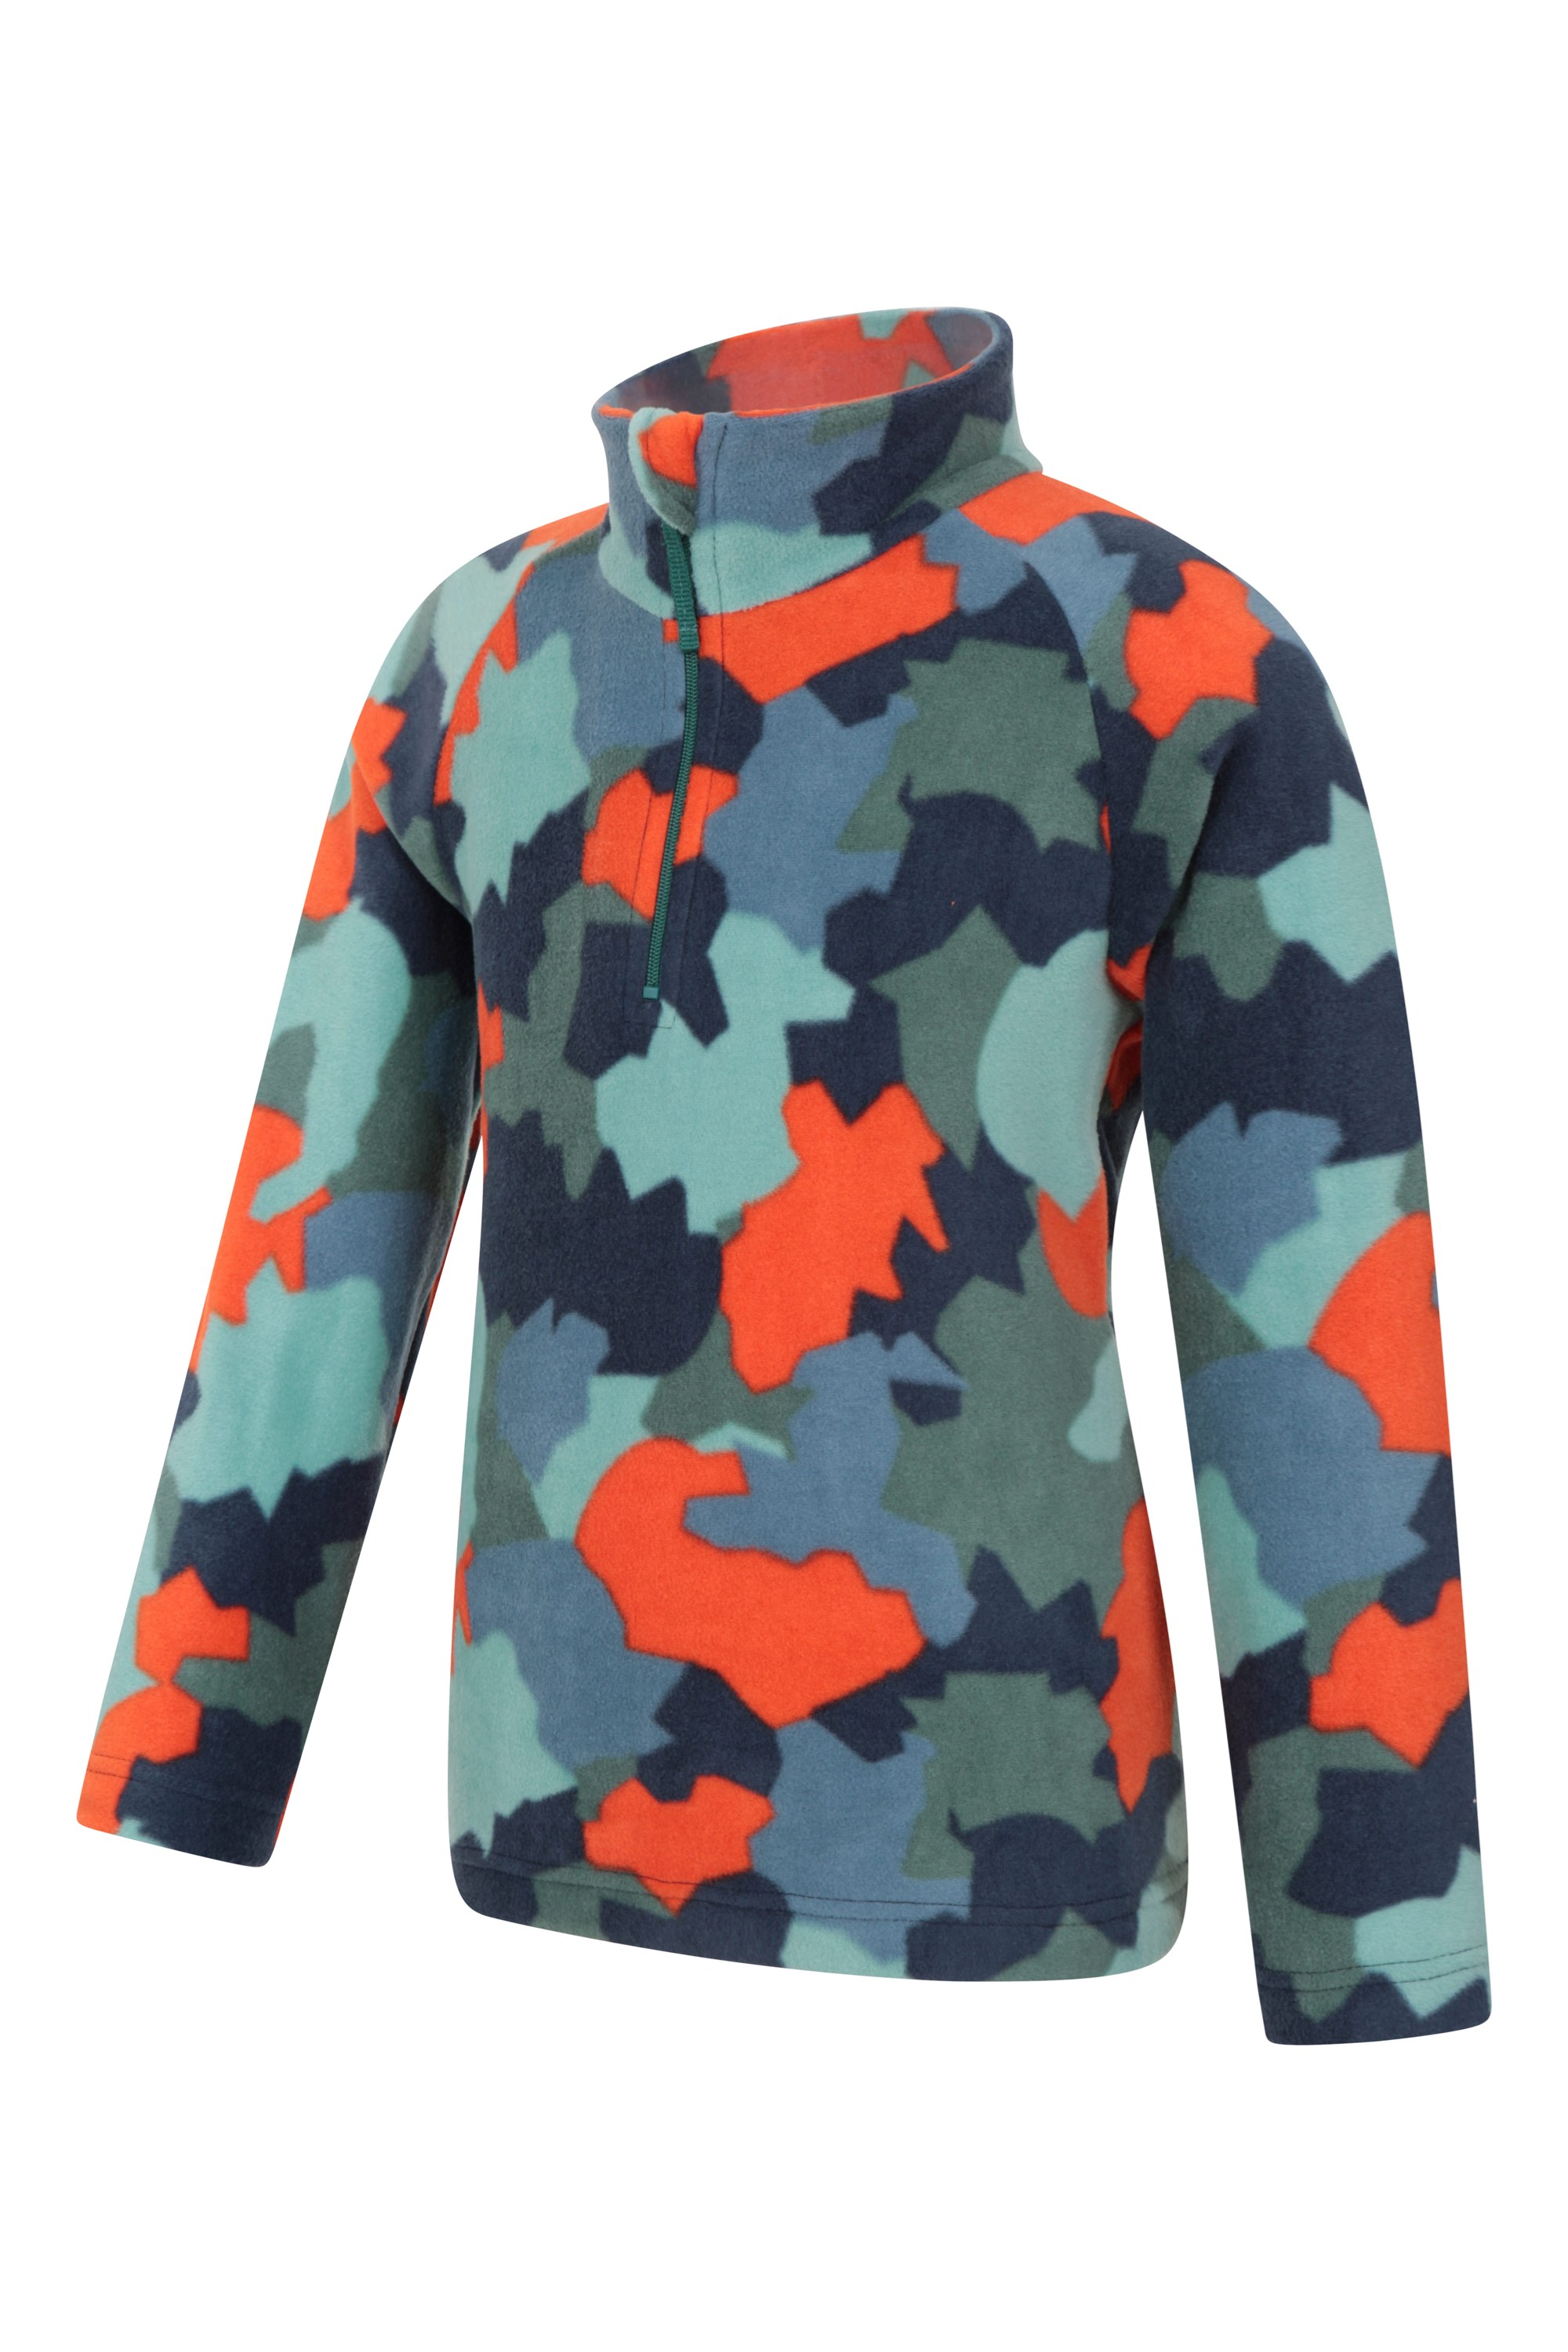 Quick Dry Outdoors Microfleece Girls & Boys Sweater Best for Daily Use Multipack Marque : Mountain WarehouseMountain Warehouse Pursuit Printed Kids Fleece Lightweight Travelling & Hiking Camouflage 9-10 Ans 